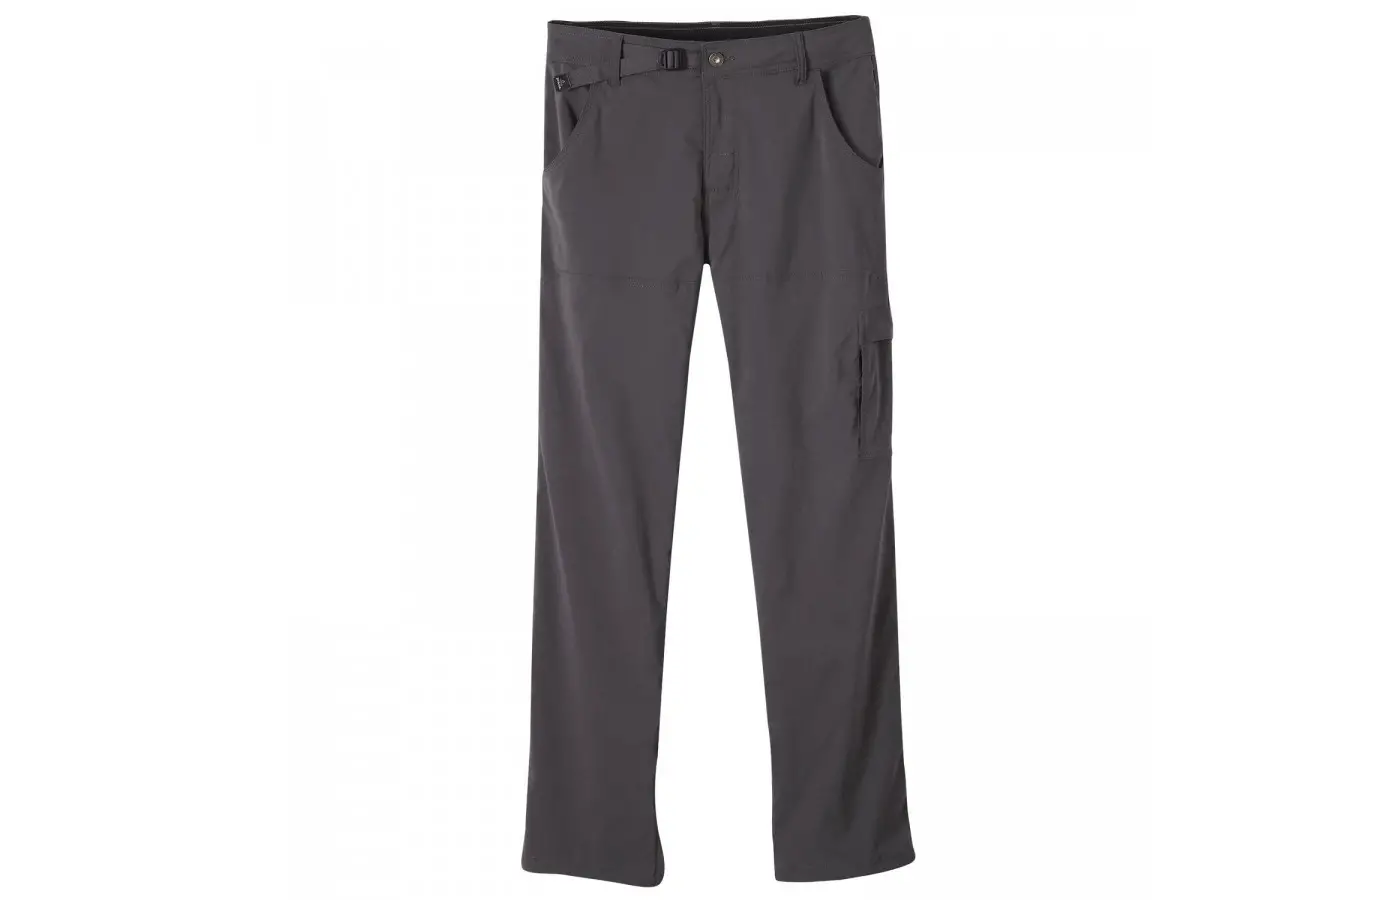 The Prana Stretch Zion offer a standard fit to suit all body types.